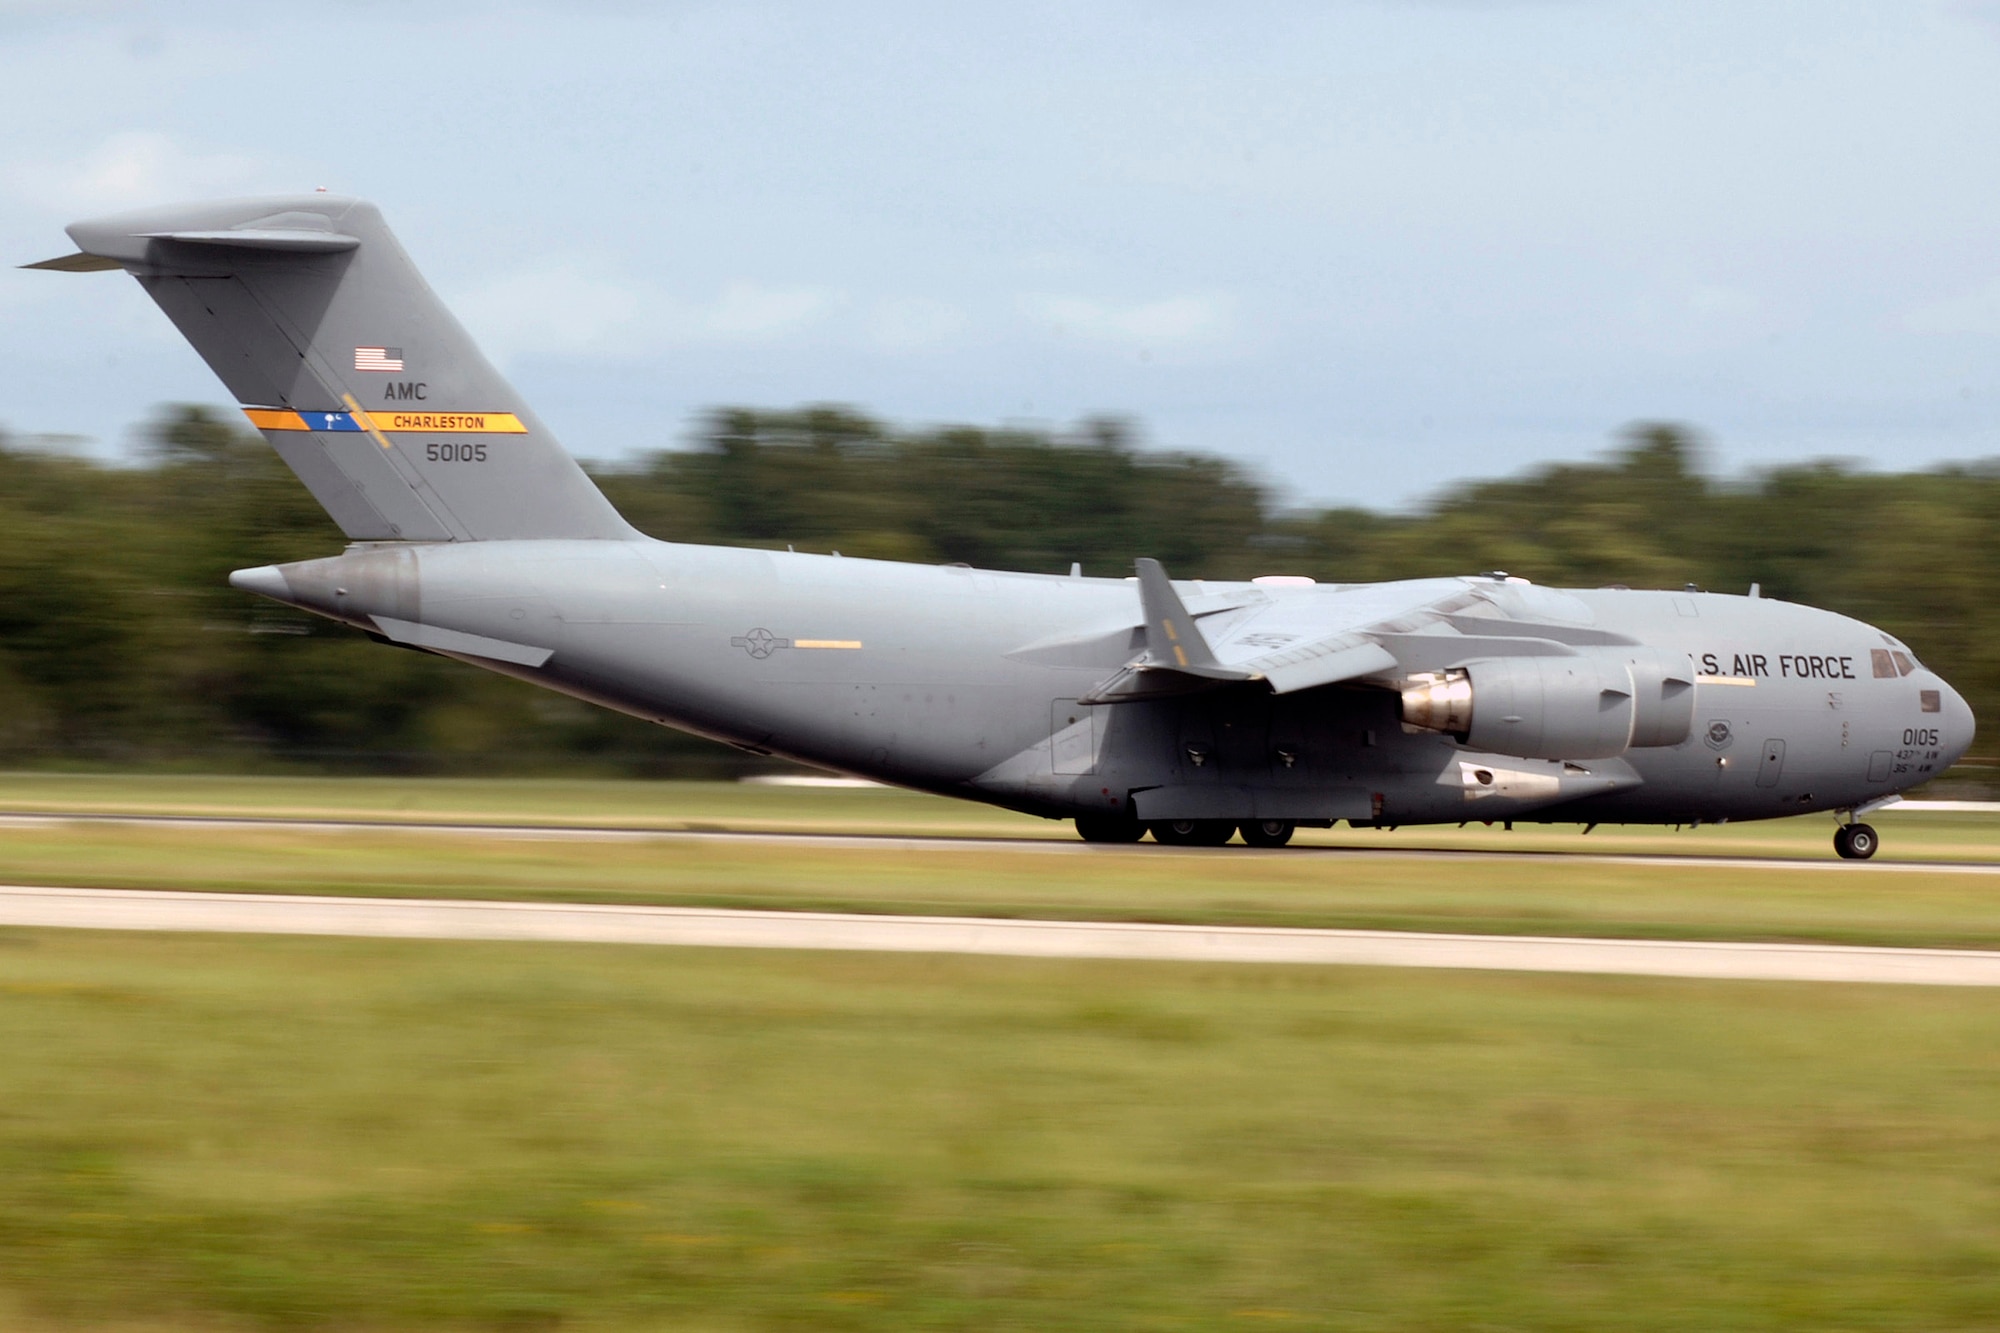 A C-17 Globemaster III takes off from a stateside location Aug. 30. The Air Force has placed two C-17 squadrons on a 120-day rotation in the U.S. Central Command Air Forces area of responsibility, according to Gen. Duncan J. McNabb, Air Mobility Command commander, who spoke at the Air Force Association's 2006 Air and Space Conference and Technology Exposition in Washington, D.C., Sept. 26. Those C-17s are now experiencing more wear and tear than would be expected under normal operations. (U.S. Air Force photo/Airman 1st Class Nicholas Pilch)